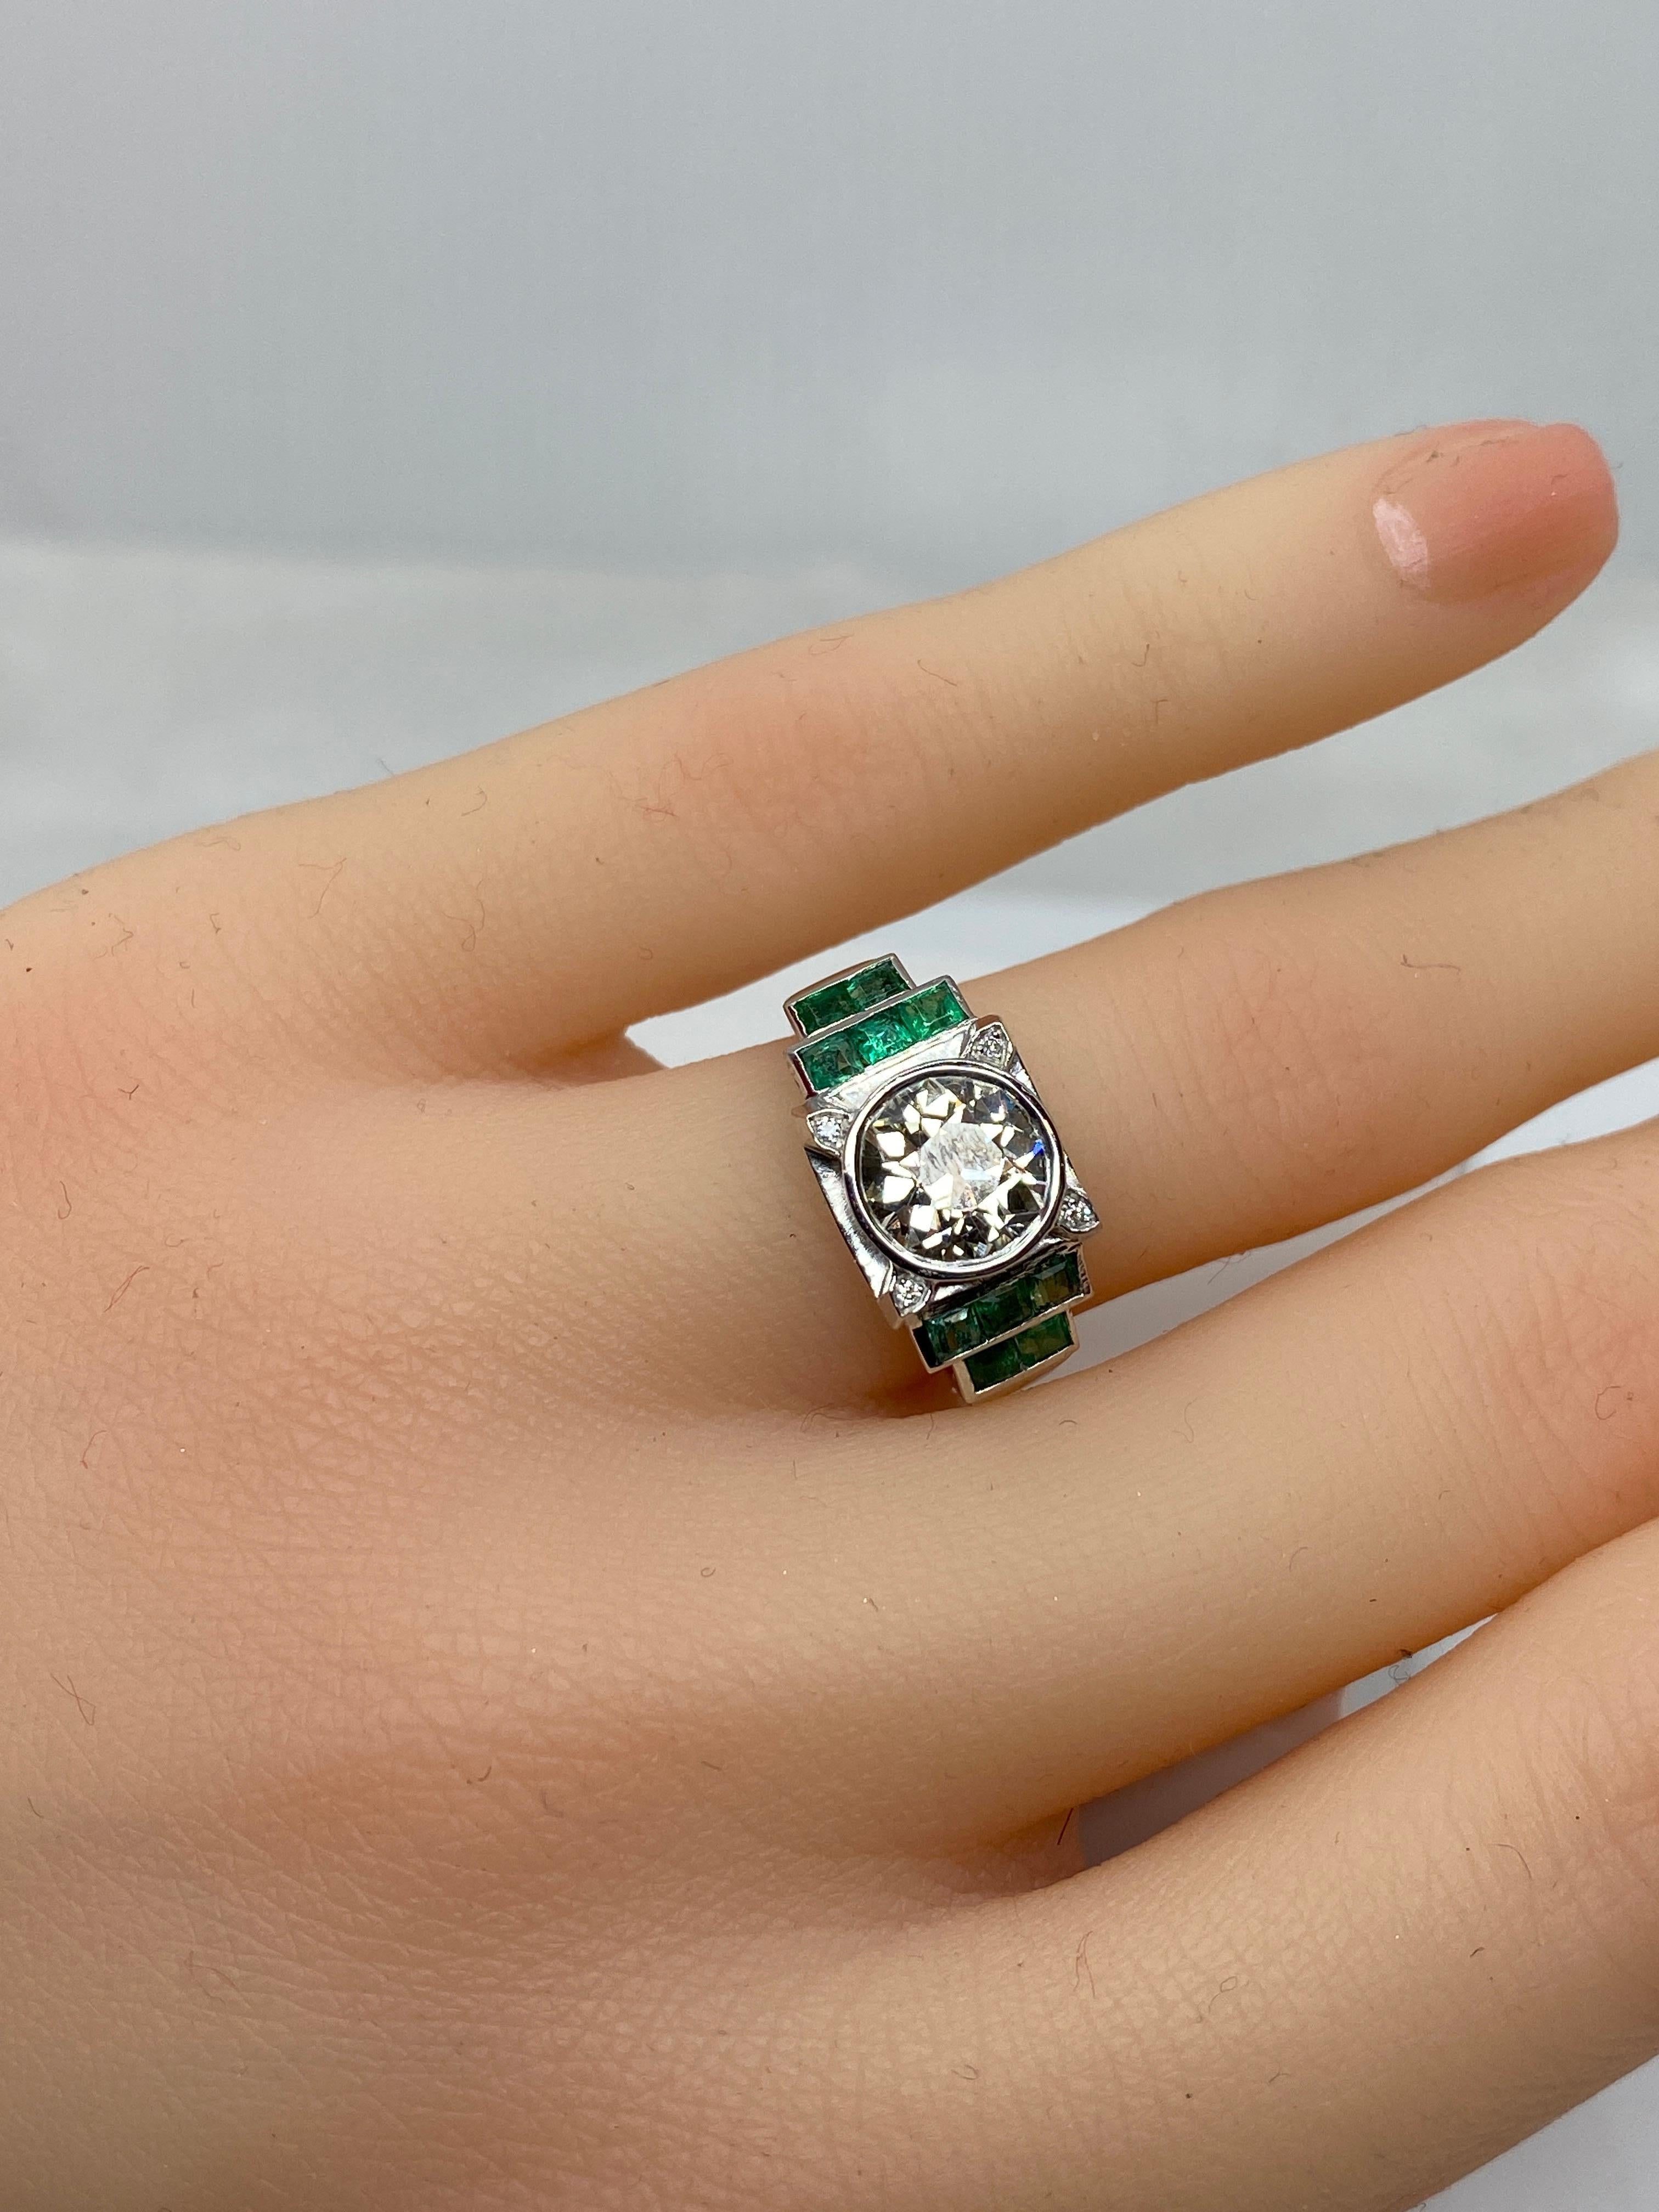 Emerald Cut Platinium Engagement Ring Set with a 1.55 Carat Diamond Backed by Emeralds, 1900 For Sale